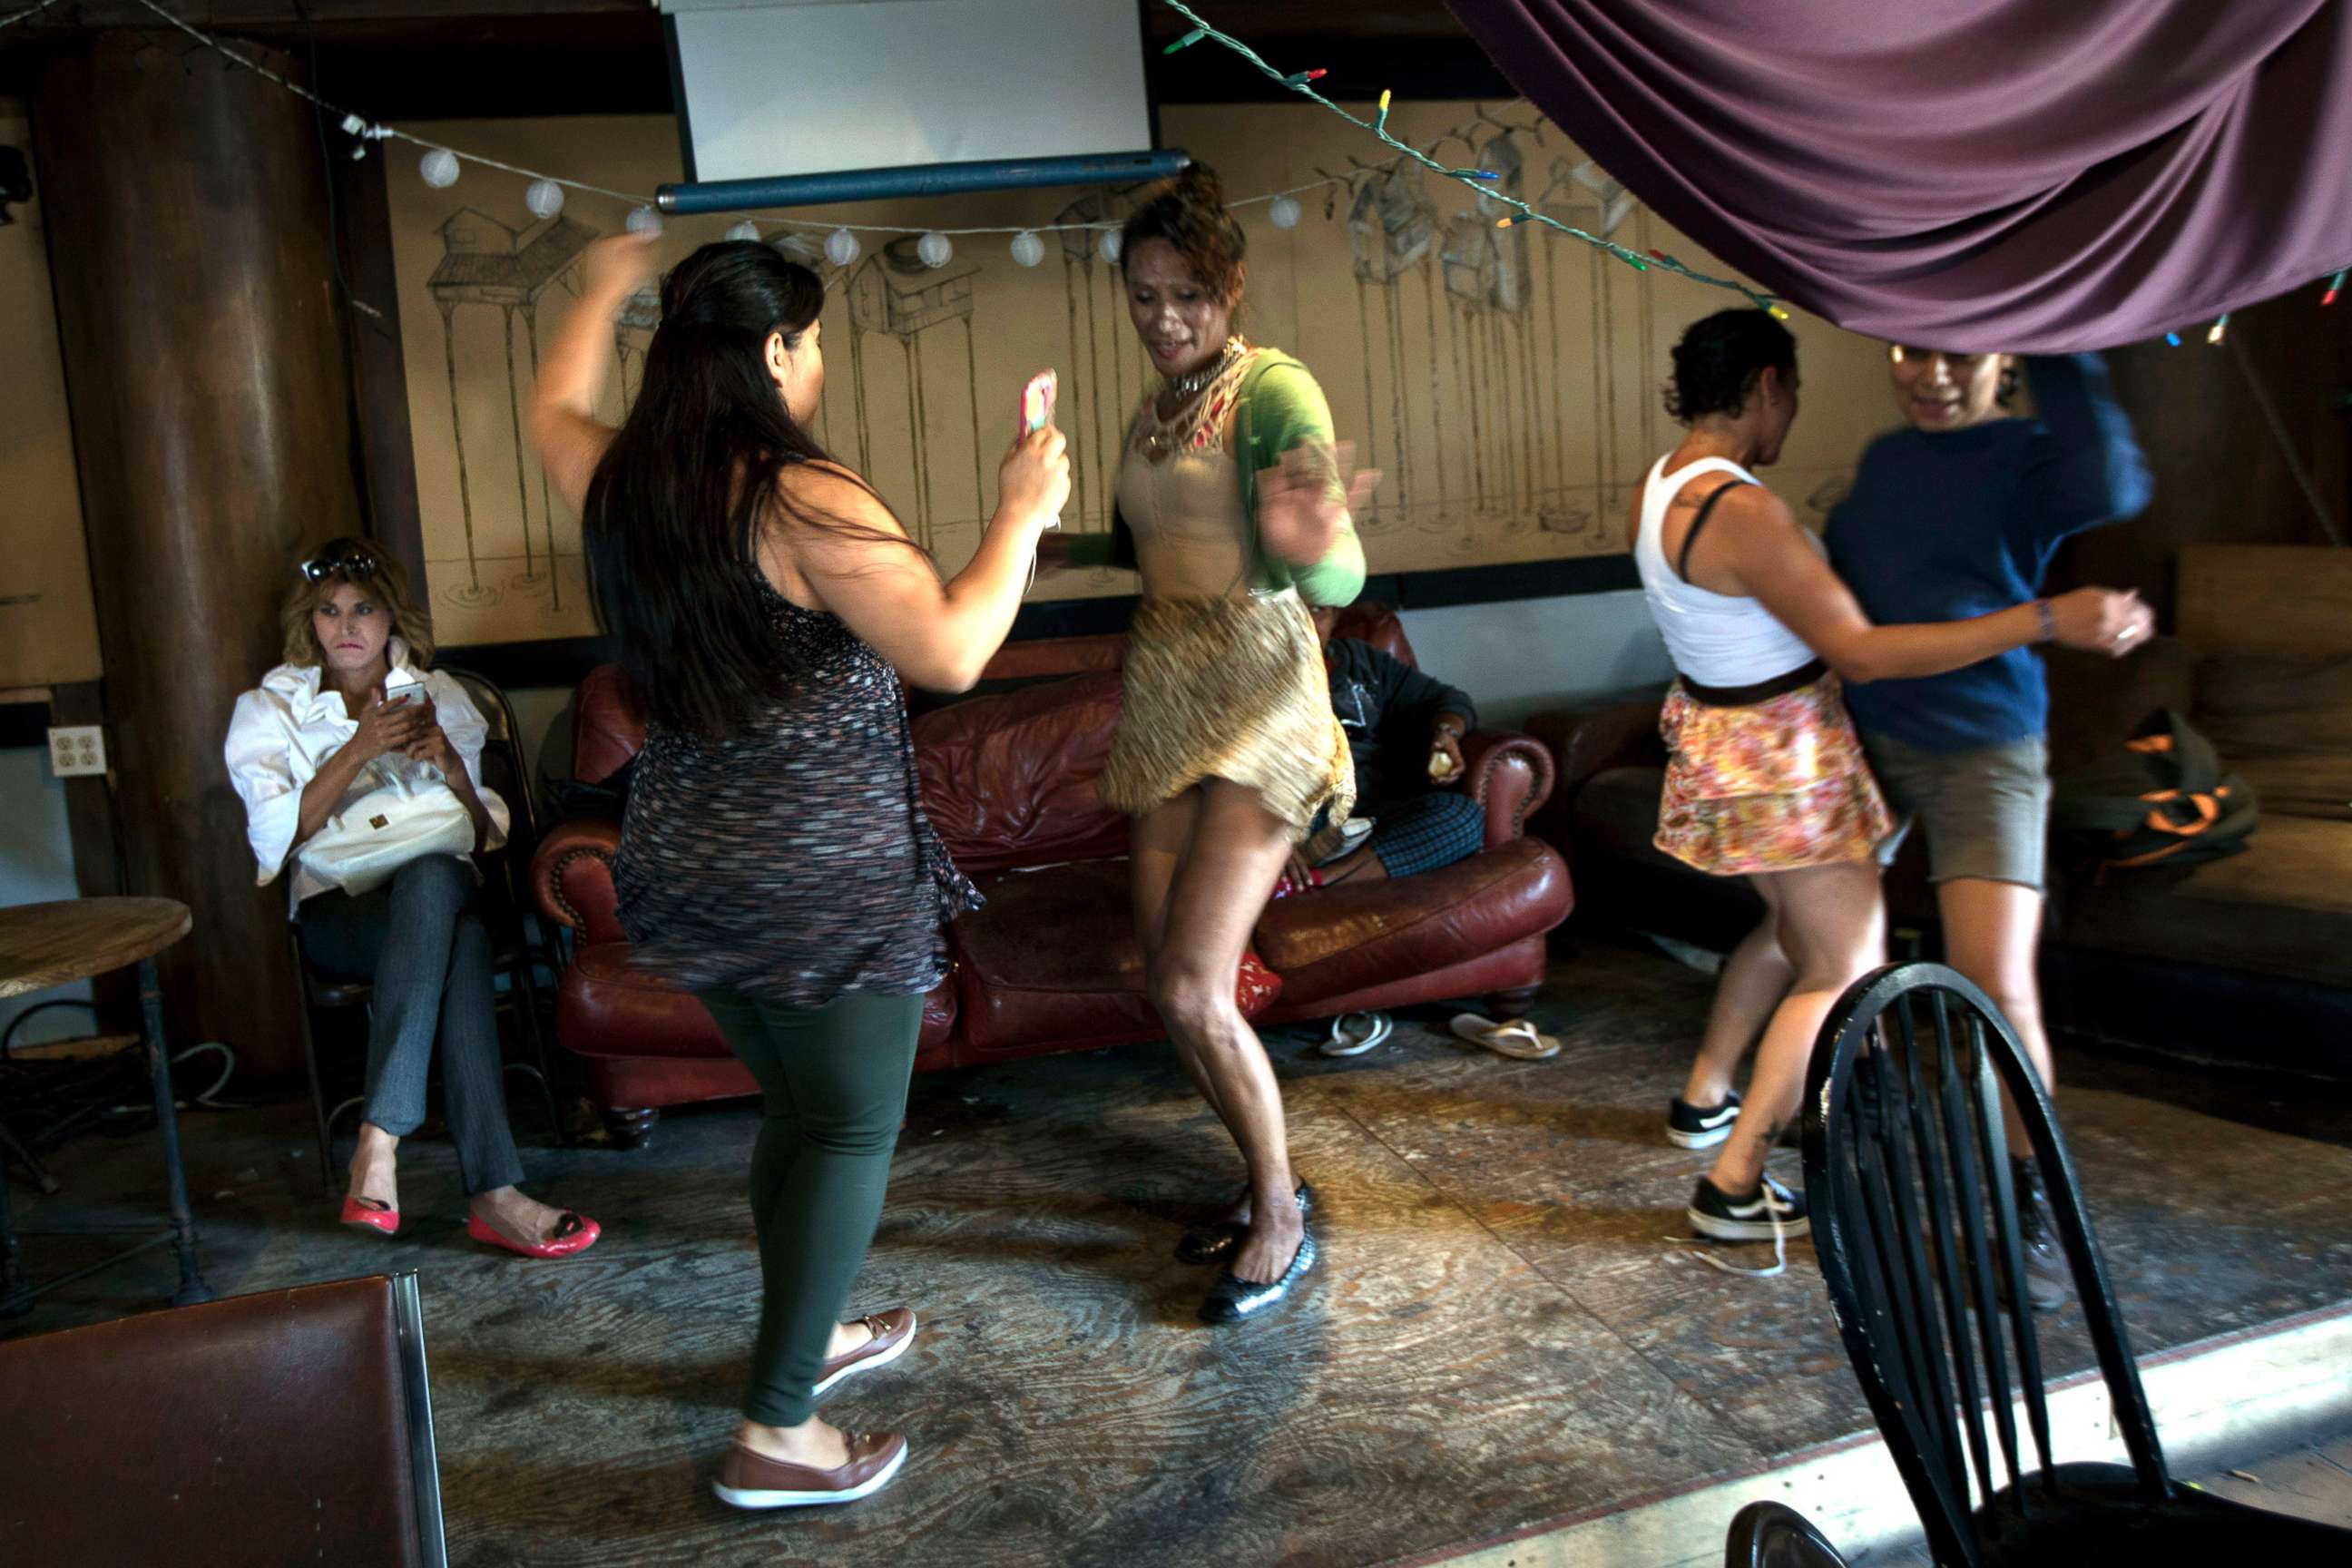 PHOTO: In this undated 2018 photo, Roxana Hernandez, sitting at left, checks her cell phone while her friends dance at the community center called El Caracol, where legal aid was being offered to migrants by volunteer US Lawyers, in Tijuana, Mexico.